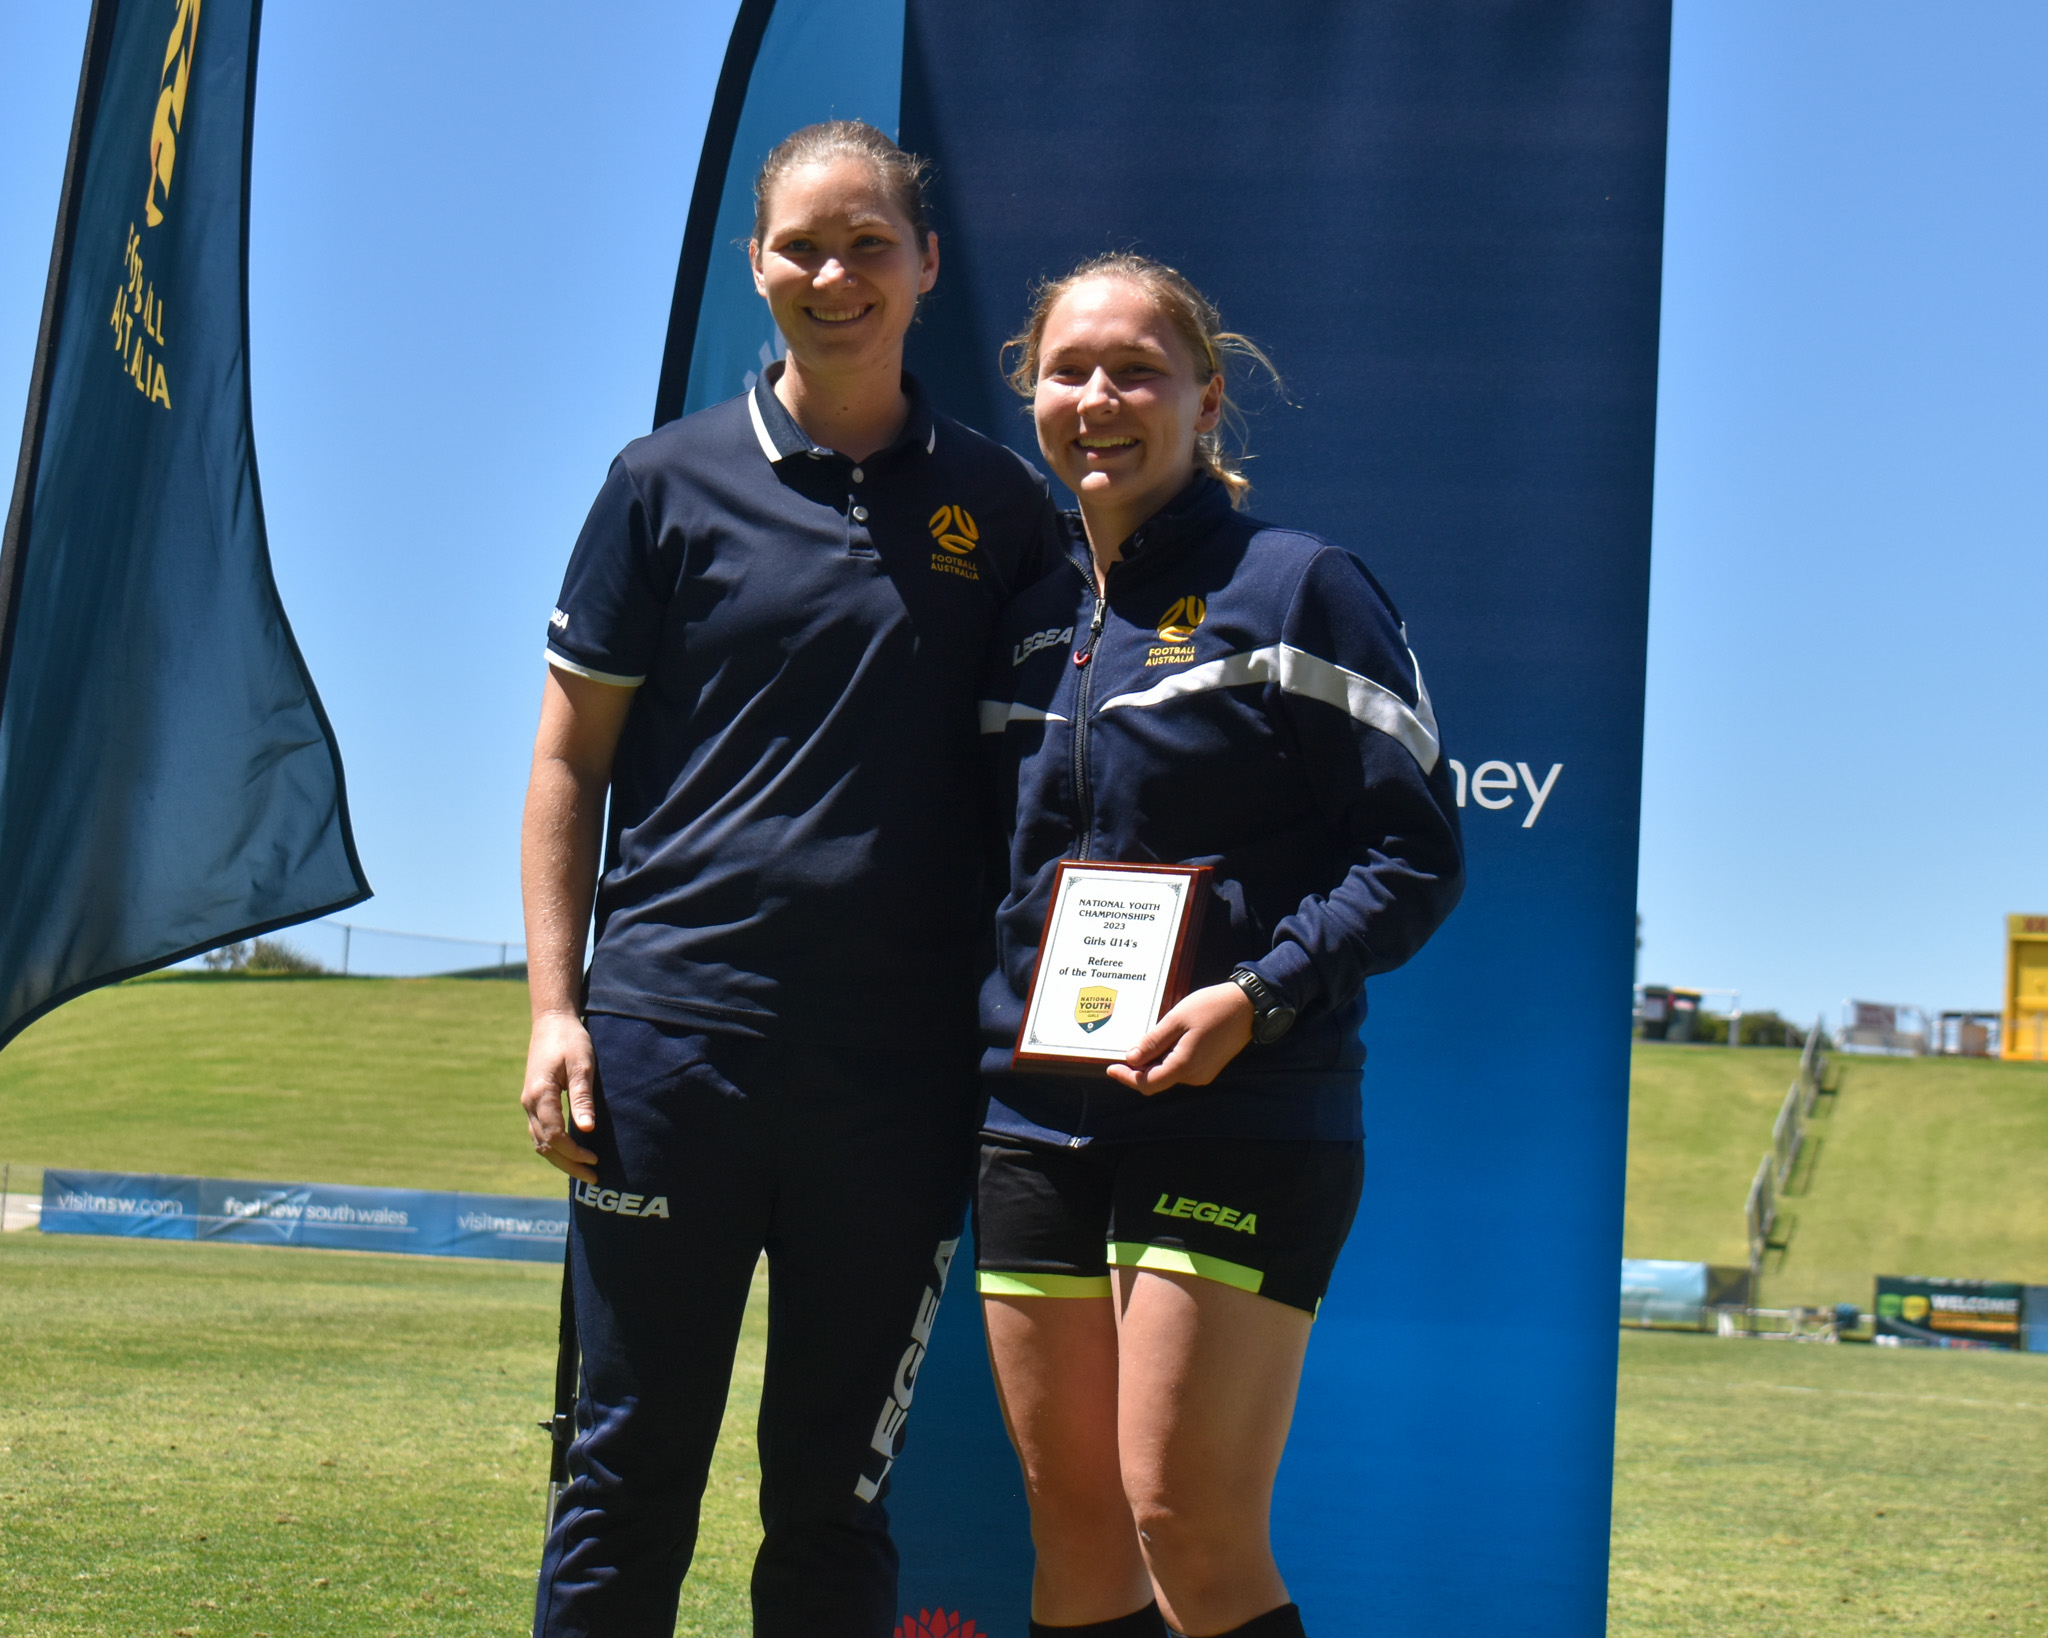 Jessica Jensen receiving the Under 14 Referee of the Tournament from Lead Referee Coach, Danielle Anderson.